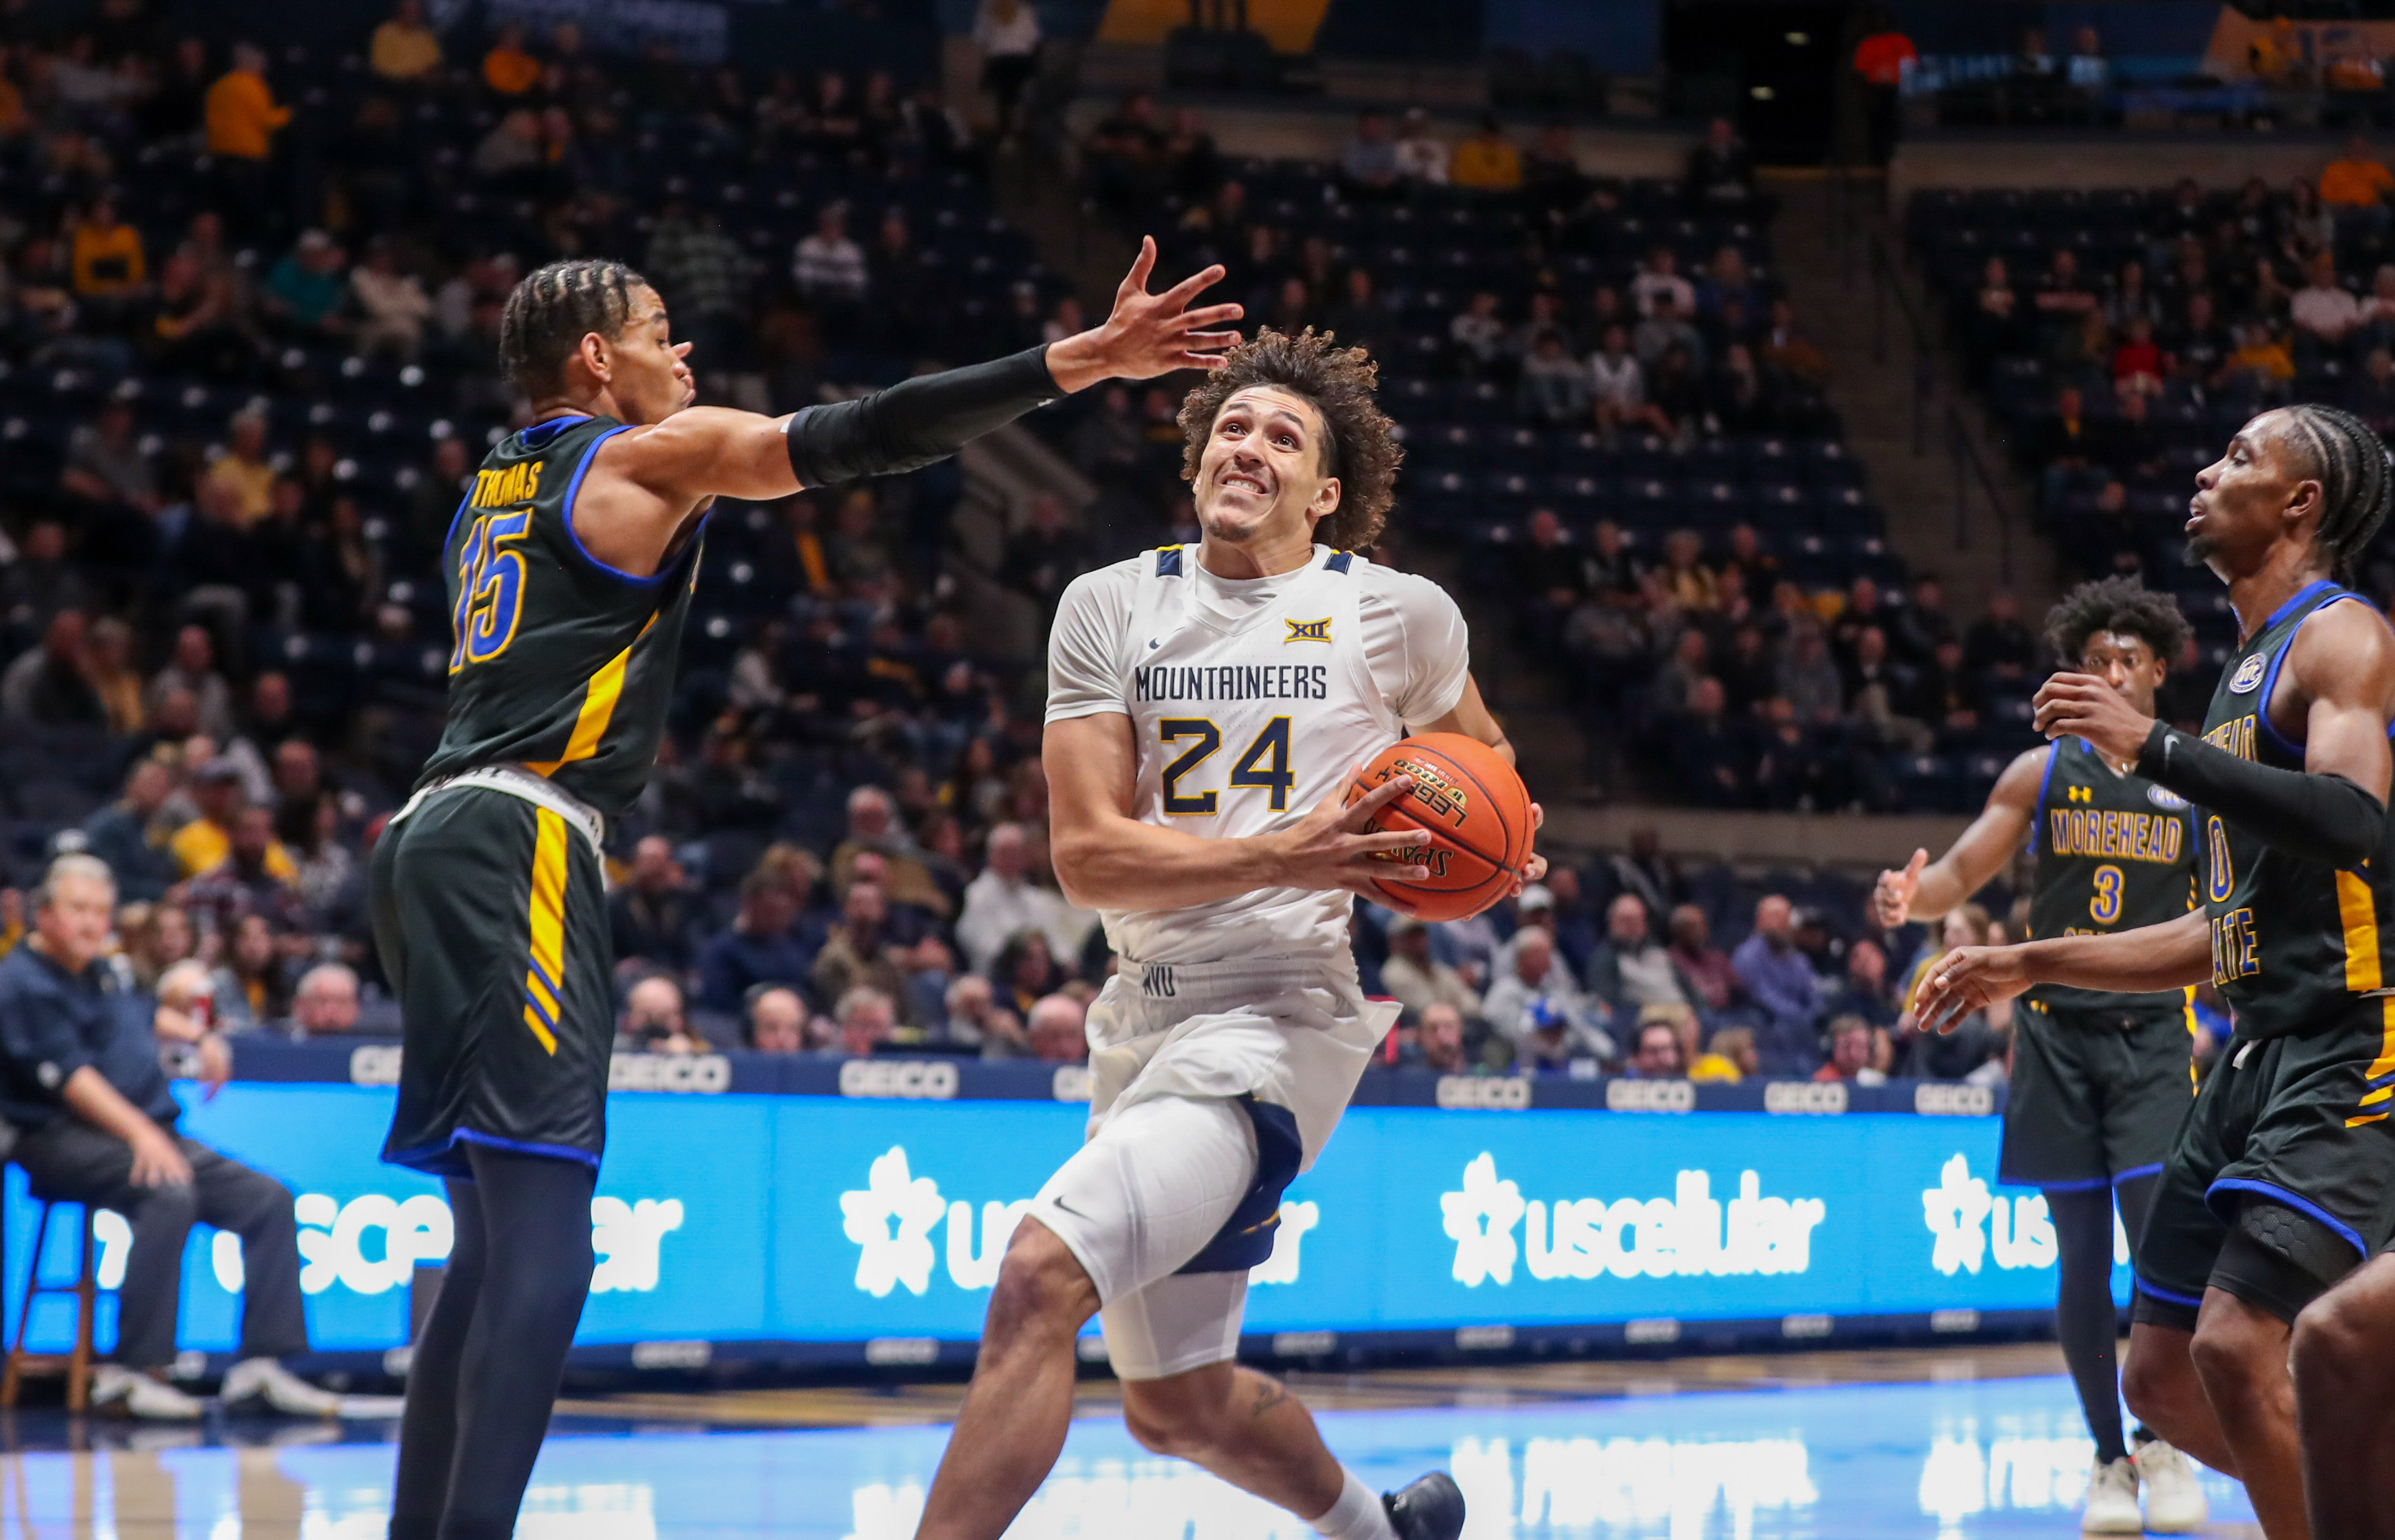 NCAA Basketball: Morehead State at West Virginia